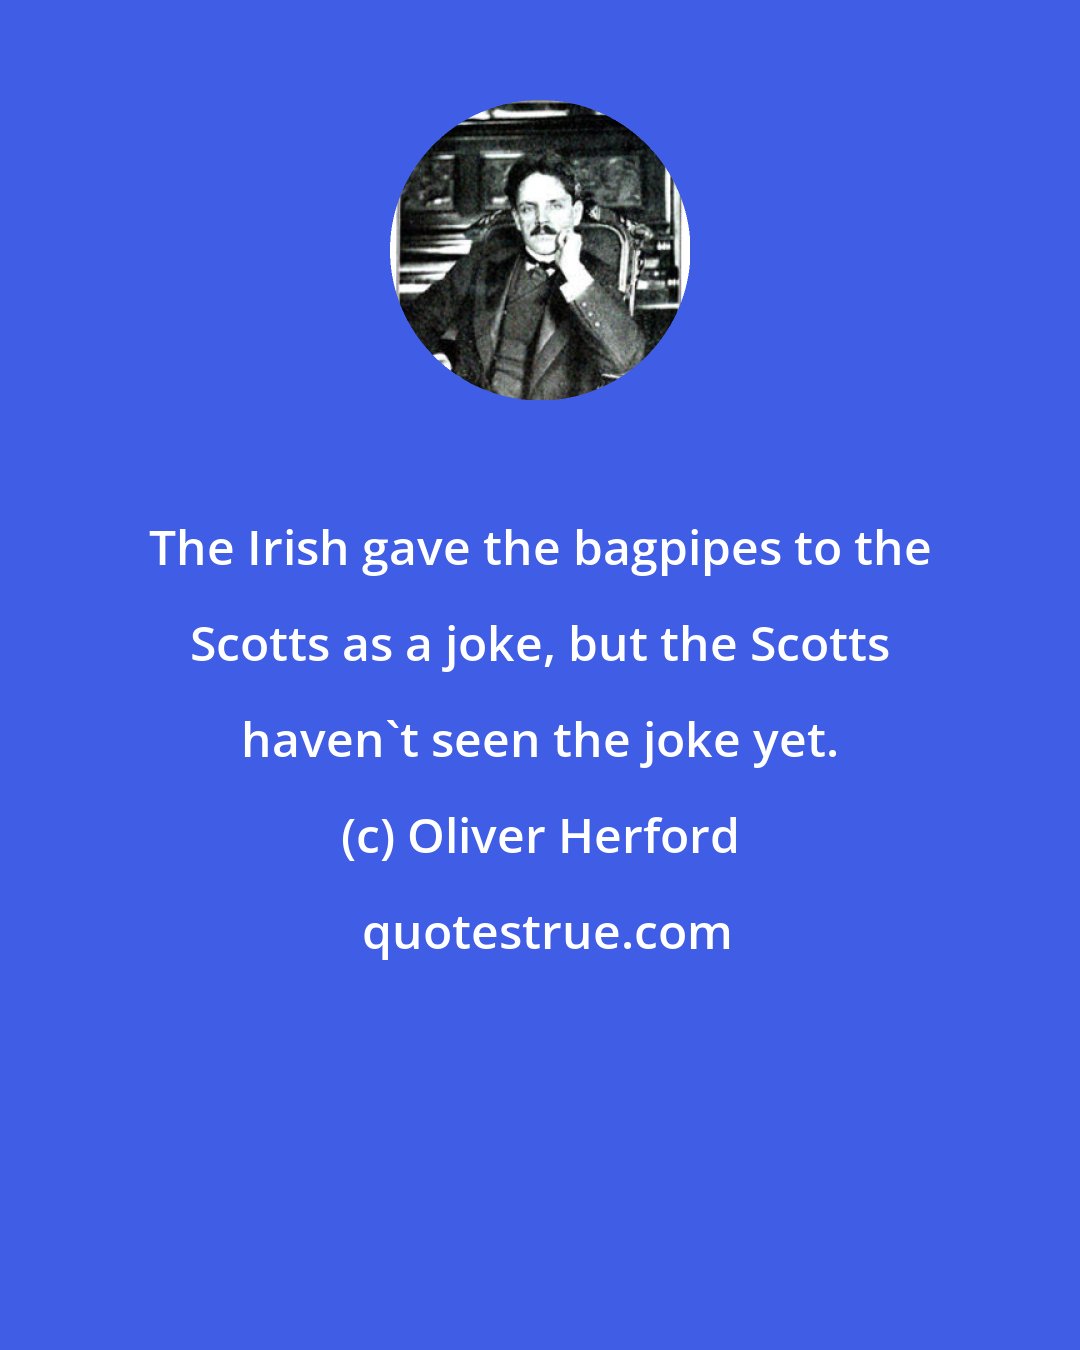 Oliver Herford: The Irish gave the bagpipes to the Scotts as a joke, but the Scotts haven't seen the joke yet.